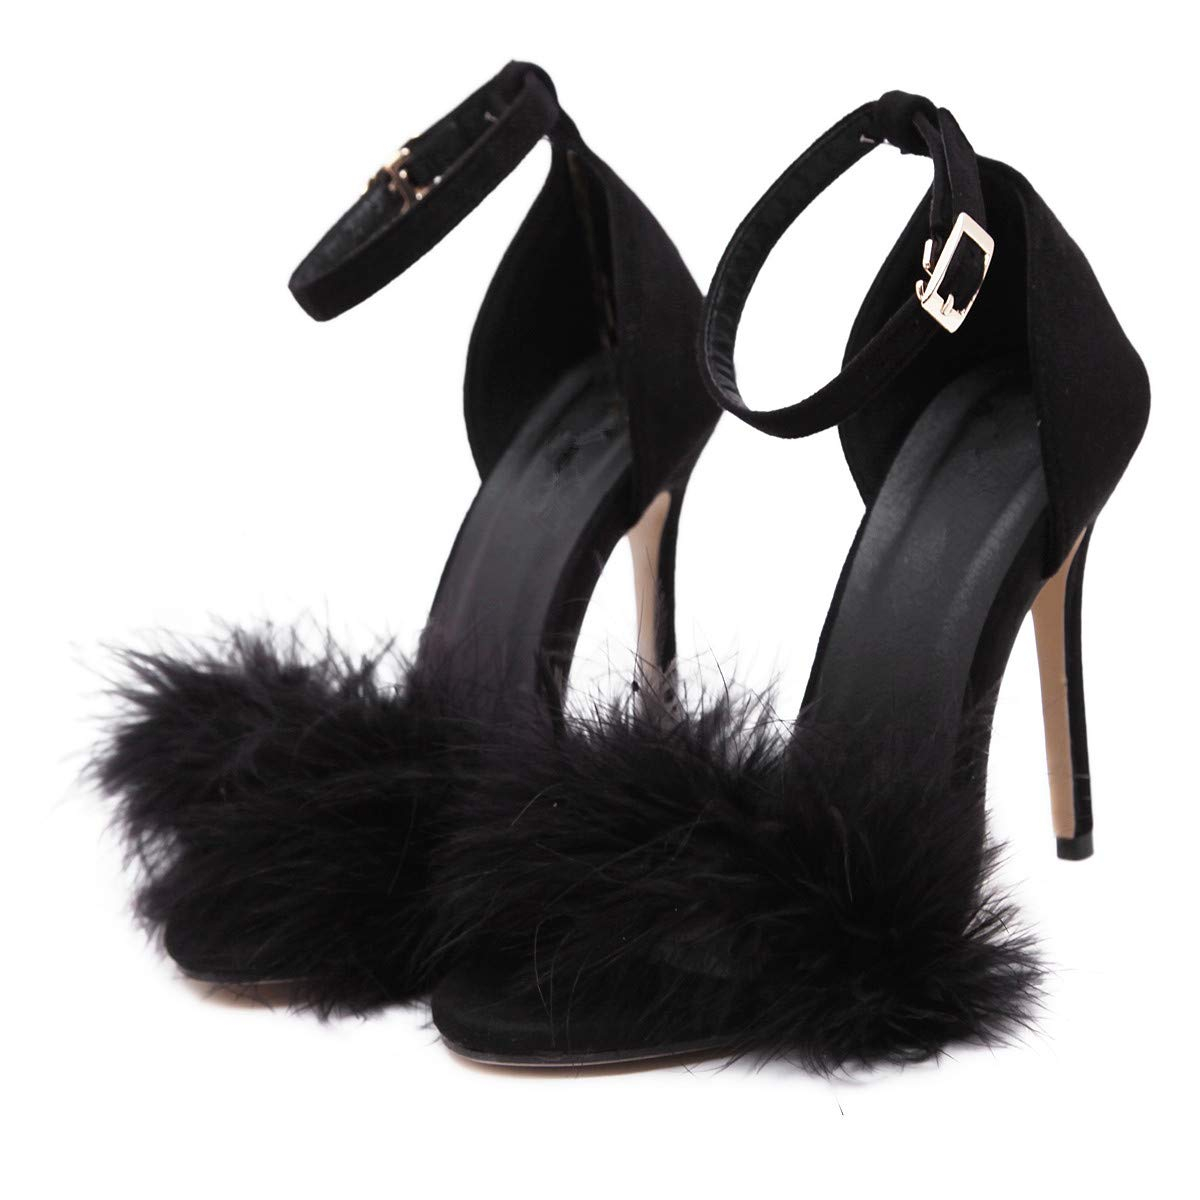 PLX11MM women's open-toed ankle sandals with fluffy feathers stiletto heeled dress